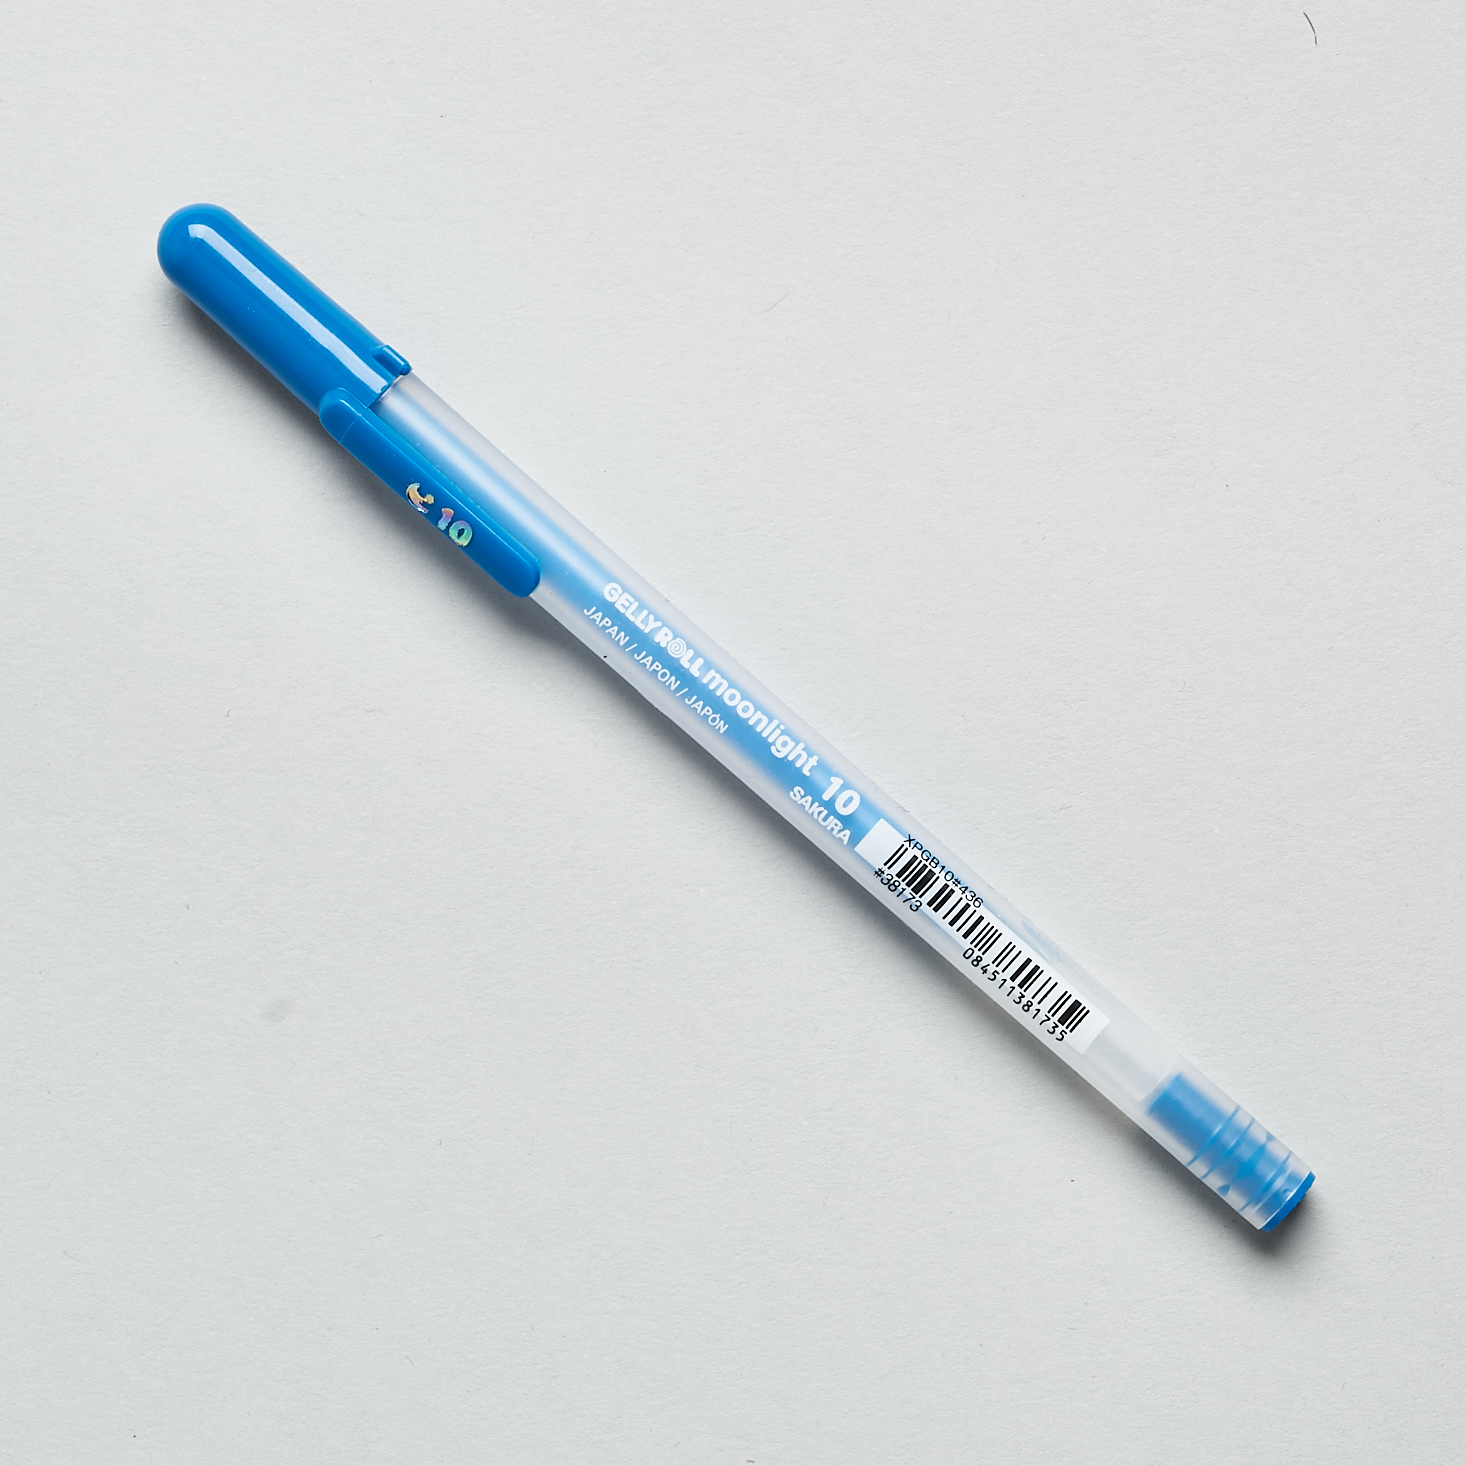 Gelly Roller pen from PostBox